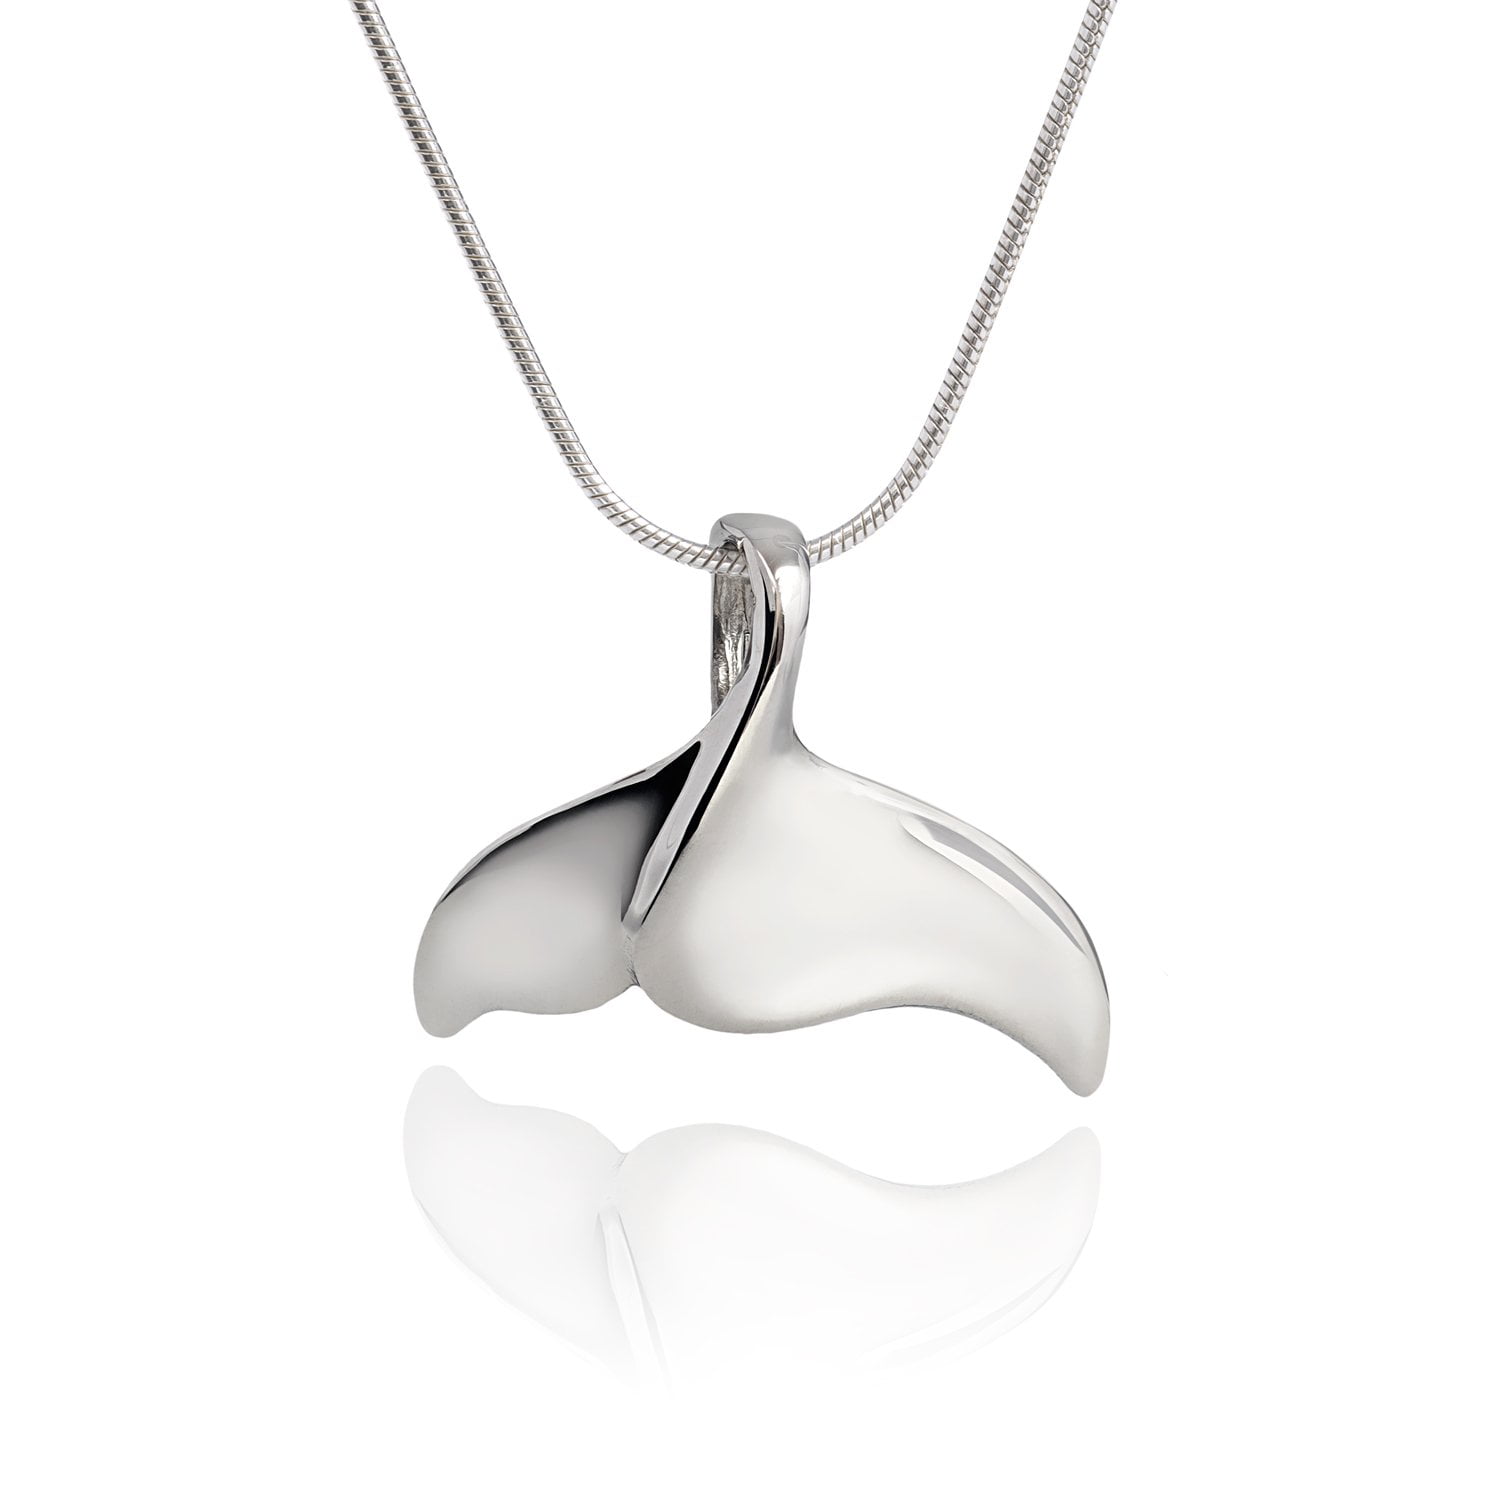 Jewels Obsession Whale Tale Necklace Rhodium-plated 925 Silver Whale Tale Pendant with 24 Necklace 